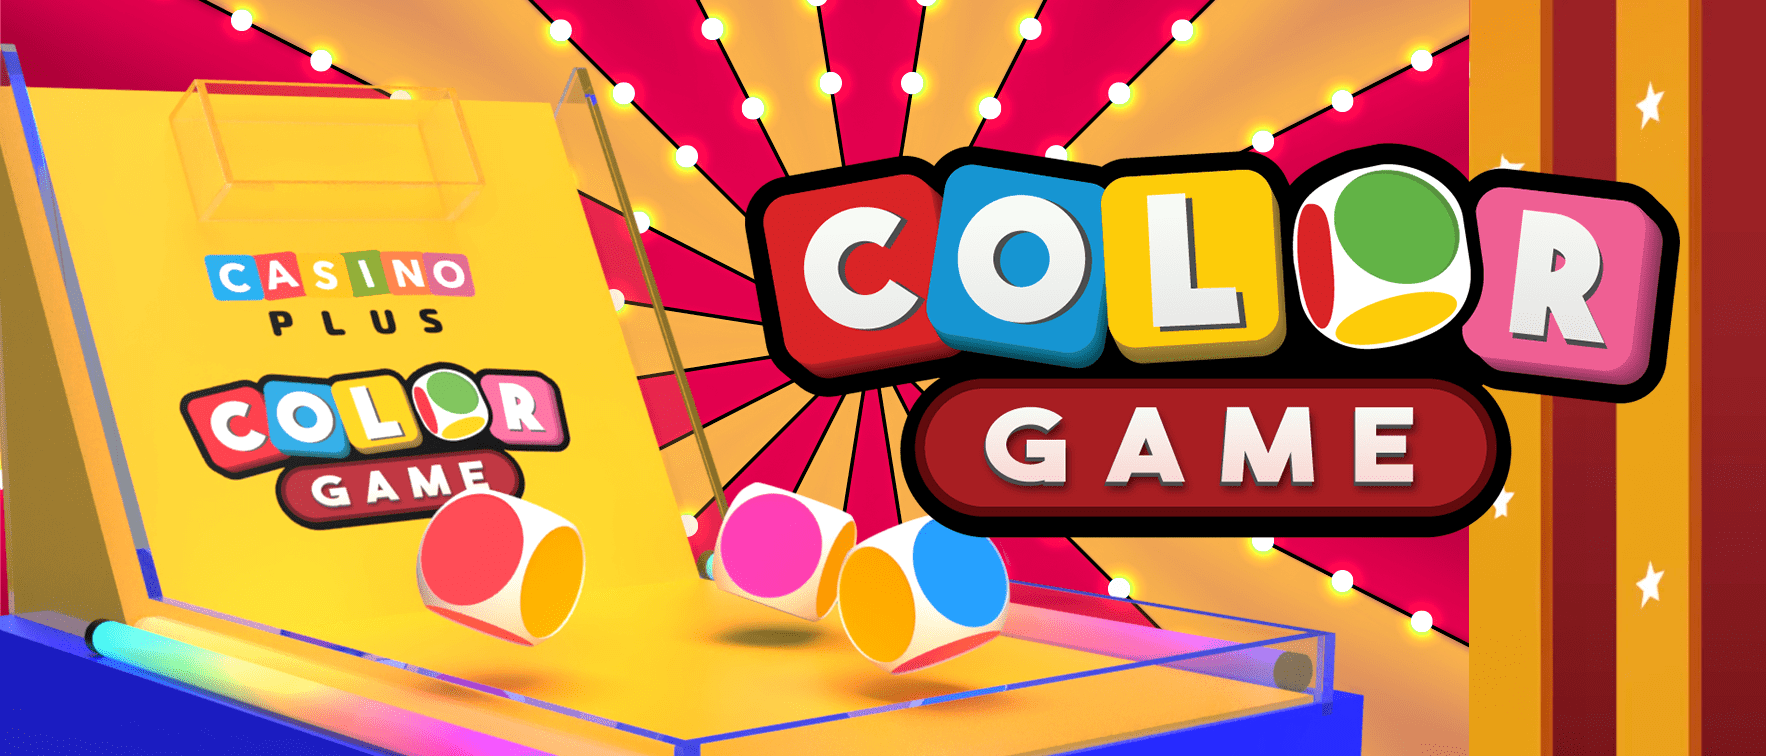 Casino Plus Color Game Betting Odds CGBP1-24022901 February 28 2024